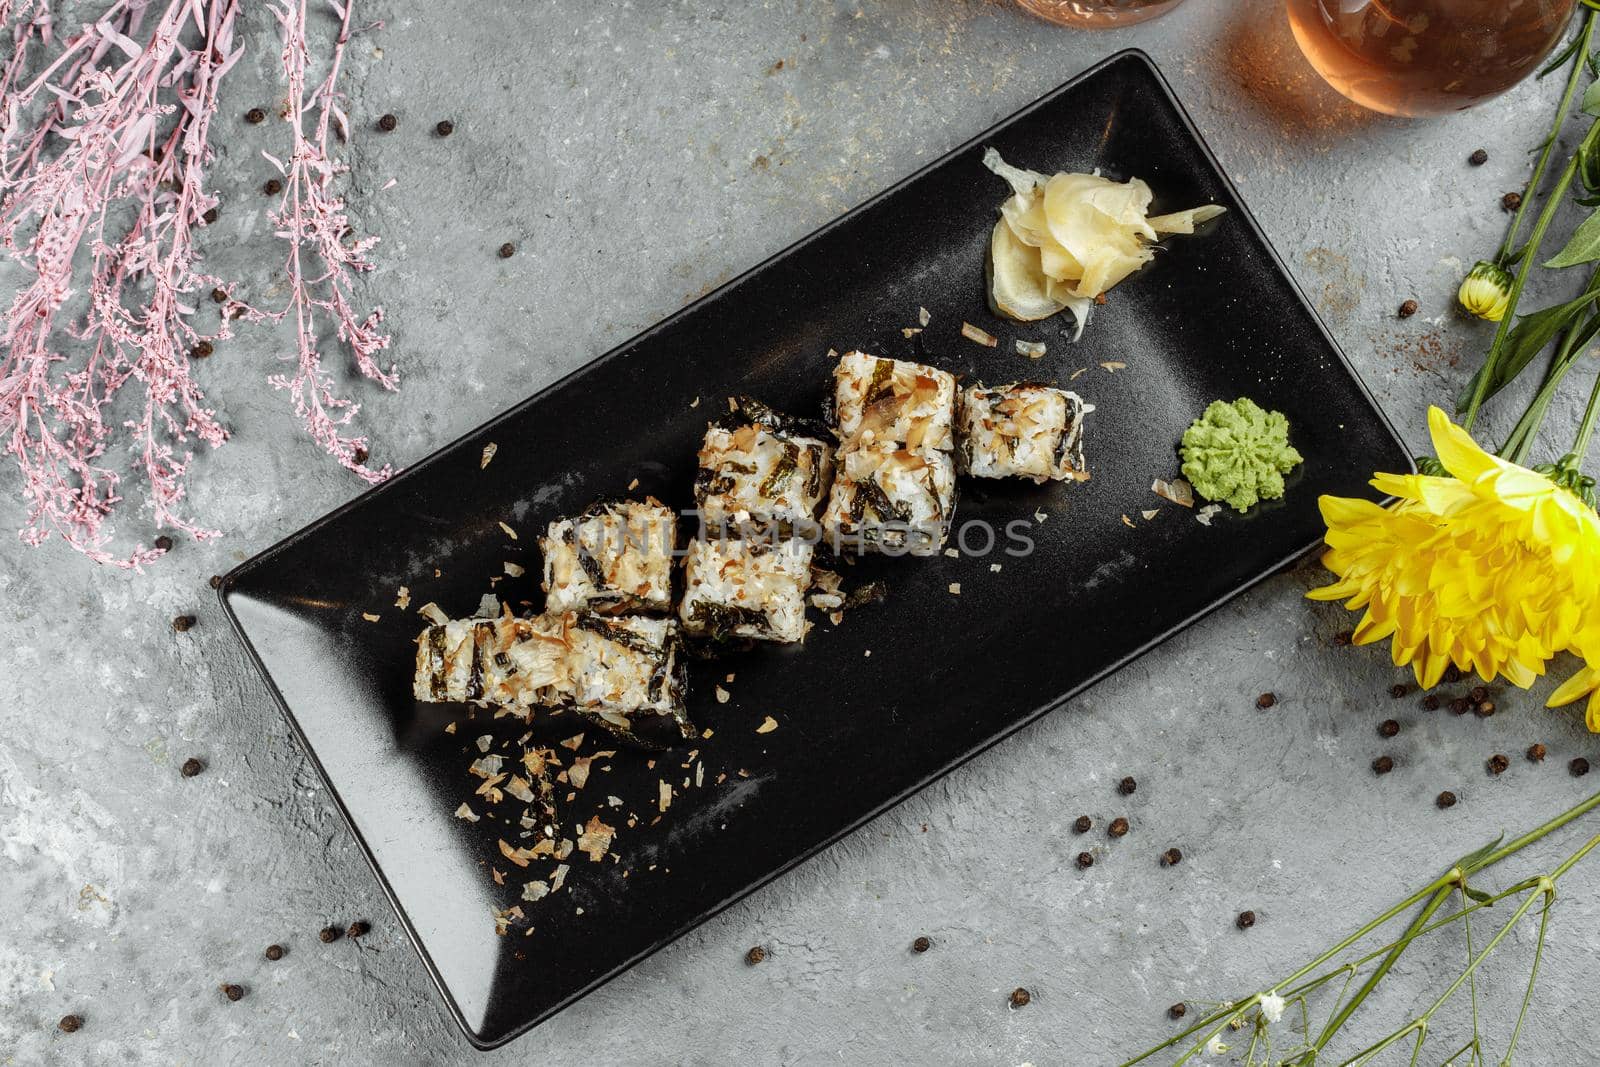 Golden dragon sushi roll with tuna, eel, cucumber, sesame seeds and tobiko caviar on wood background.